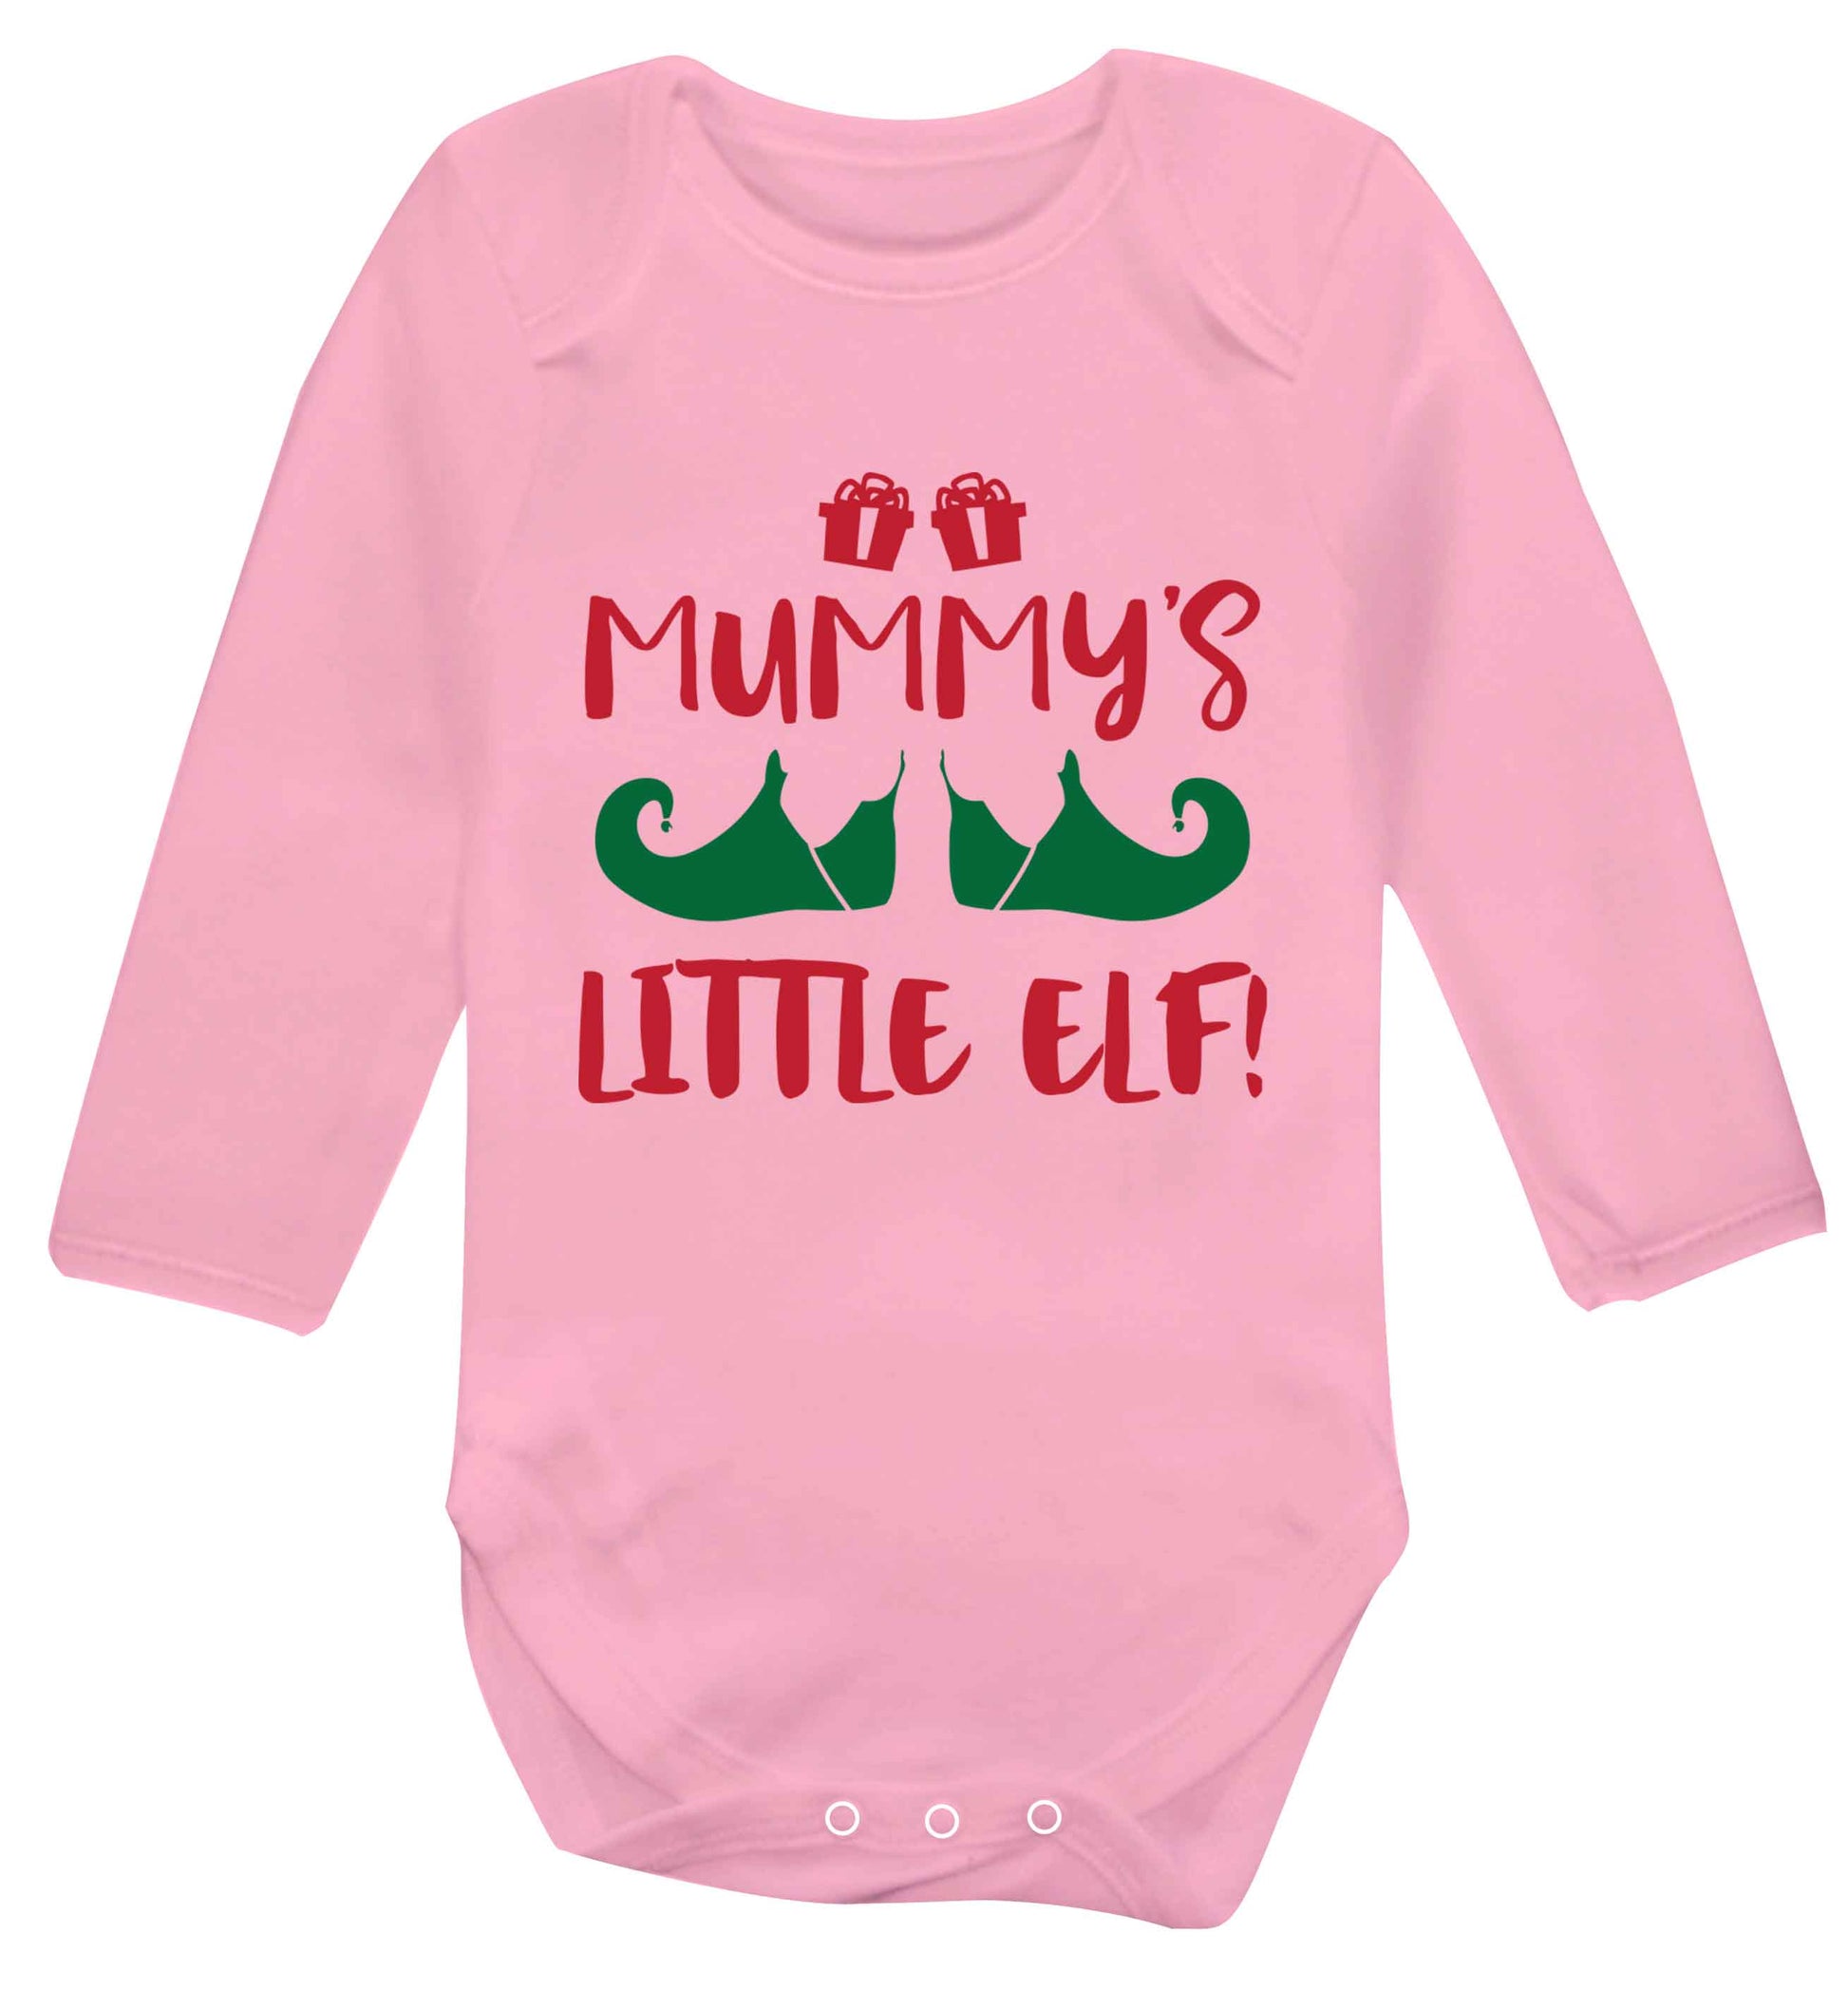 Mummy's little elf Baby Vest long sleeved pale pink 6-12 months